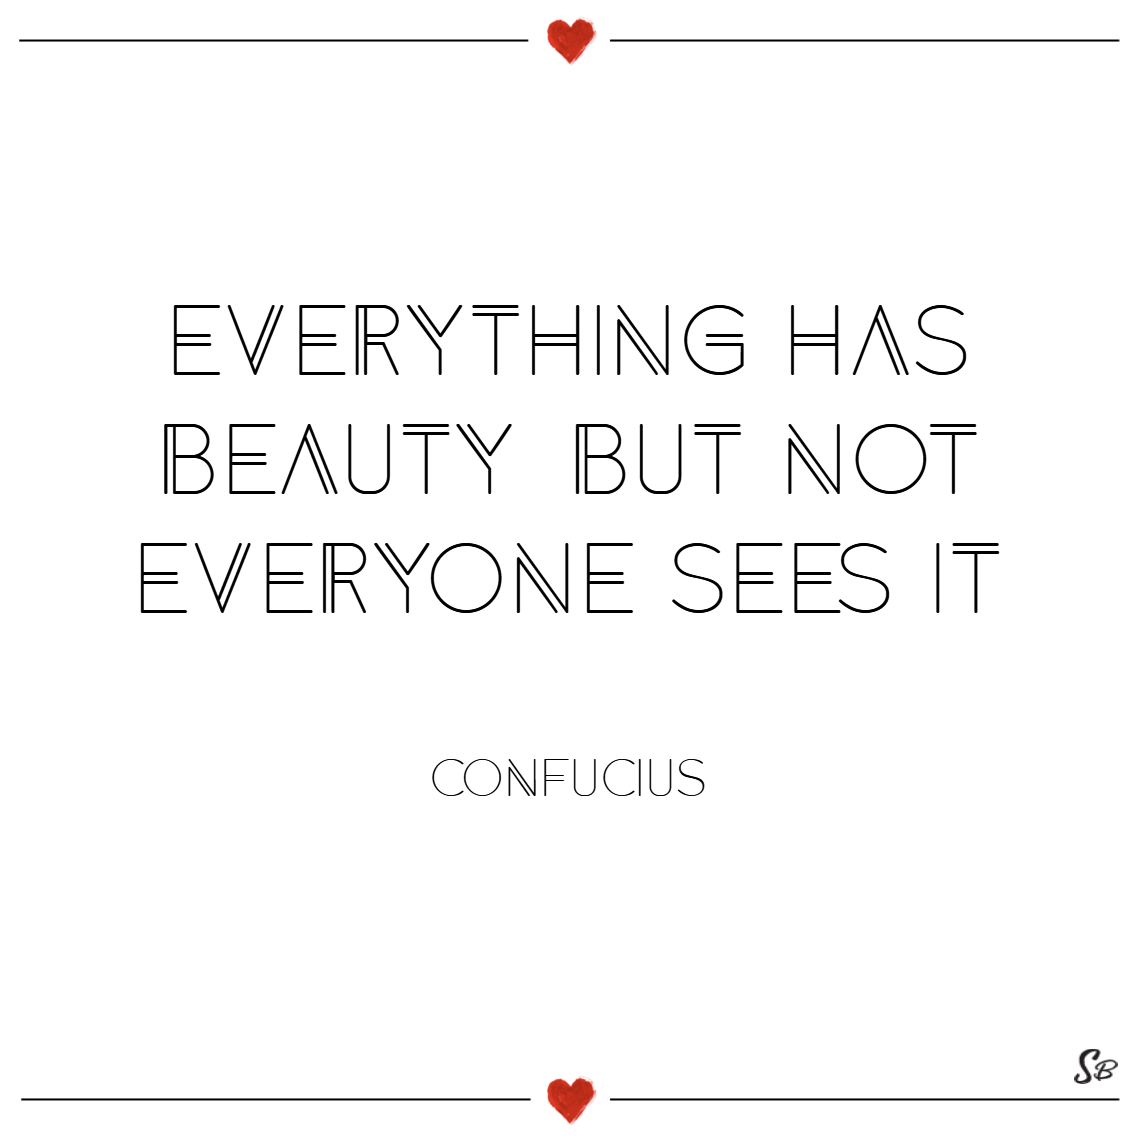 Everything has beauty, but not everyone sees it. – confucius